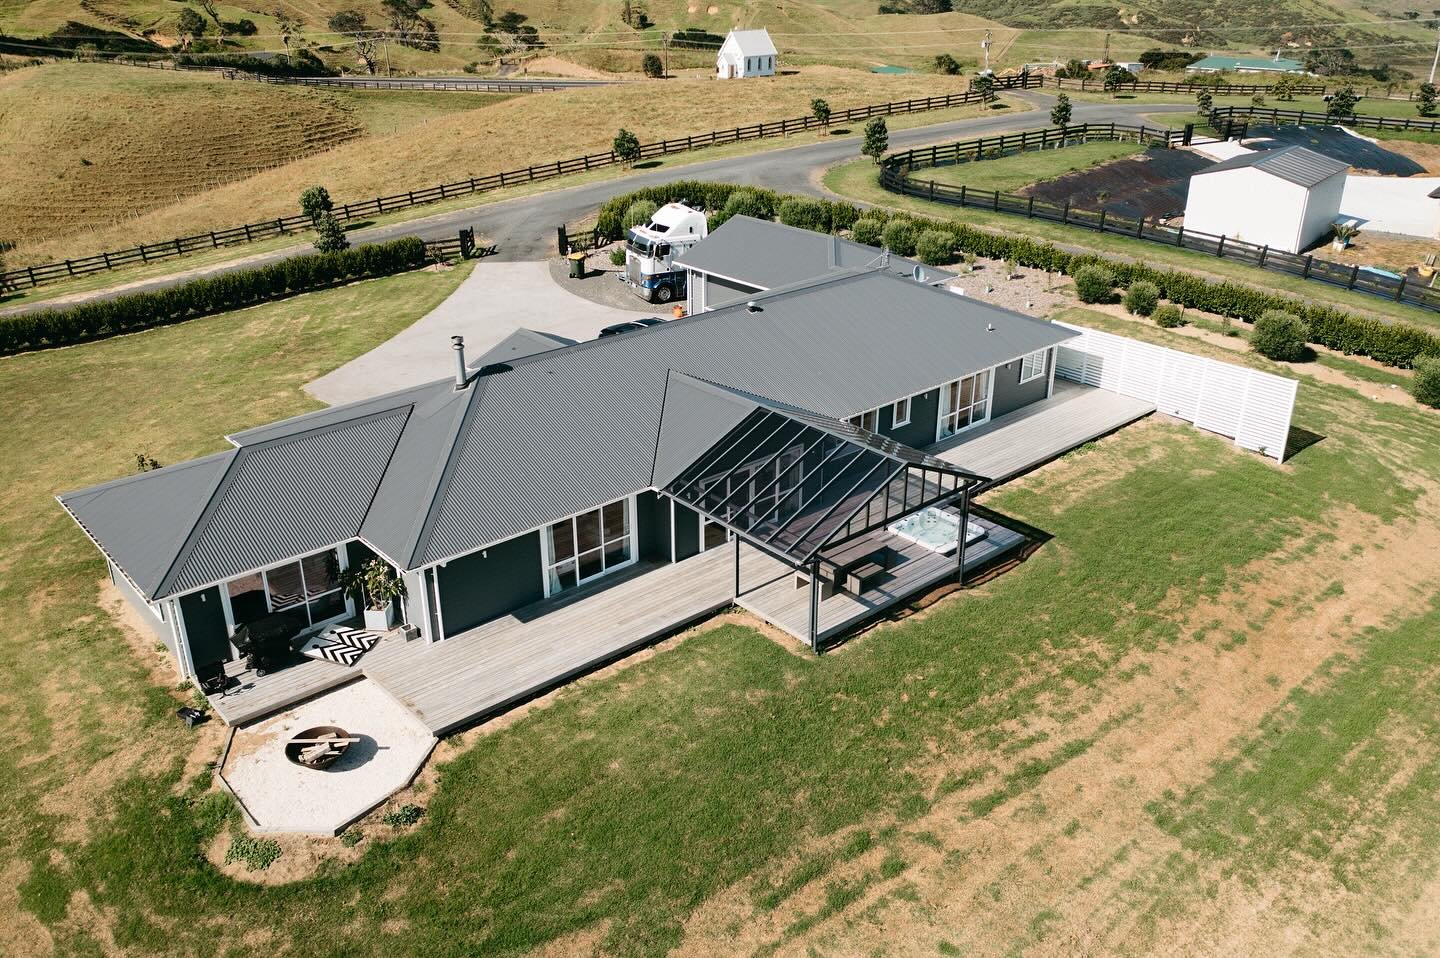 A Birds Eye view of one of our custom gable canopies. Gorgeous from every angle! 

☎️ 0800 SHADE 4 U
📧 info@shadescape.co.nz 
🖥 www.shadescape.co.nz

#aucklandcanopy #newzealandbusiness #aucklandcanopies #gardendesign #homedesign #outdoorarchitectu